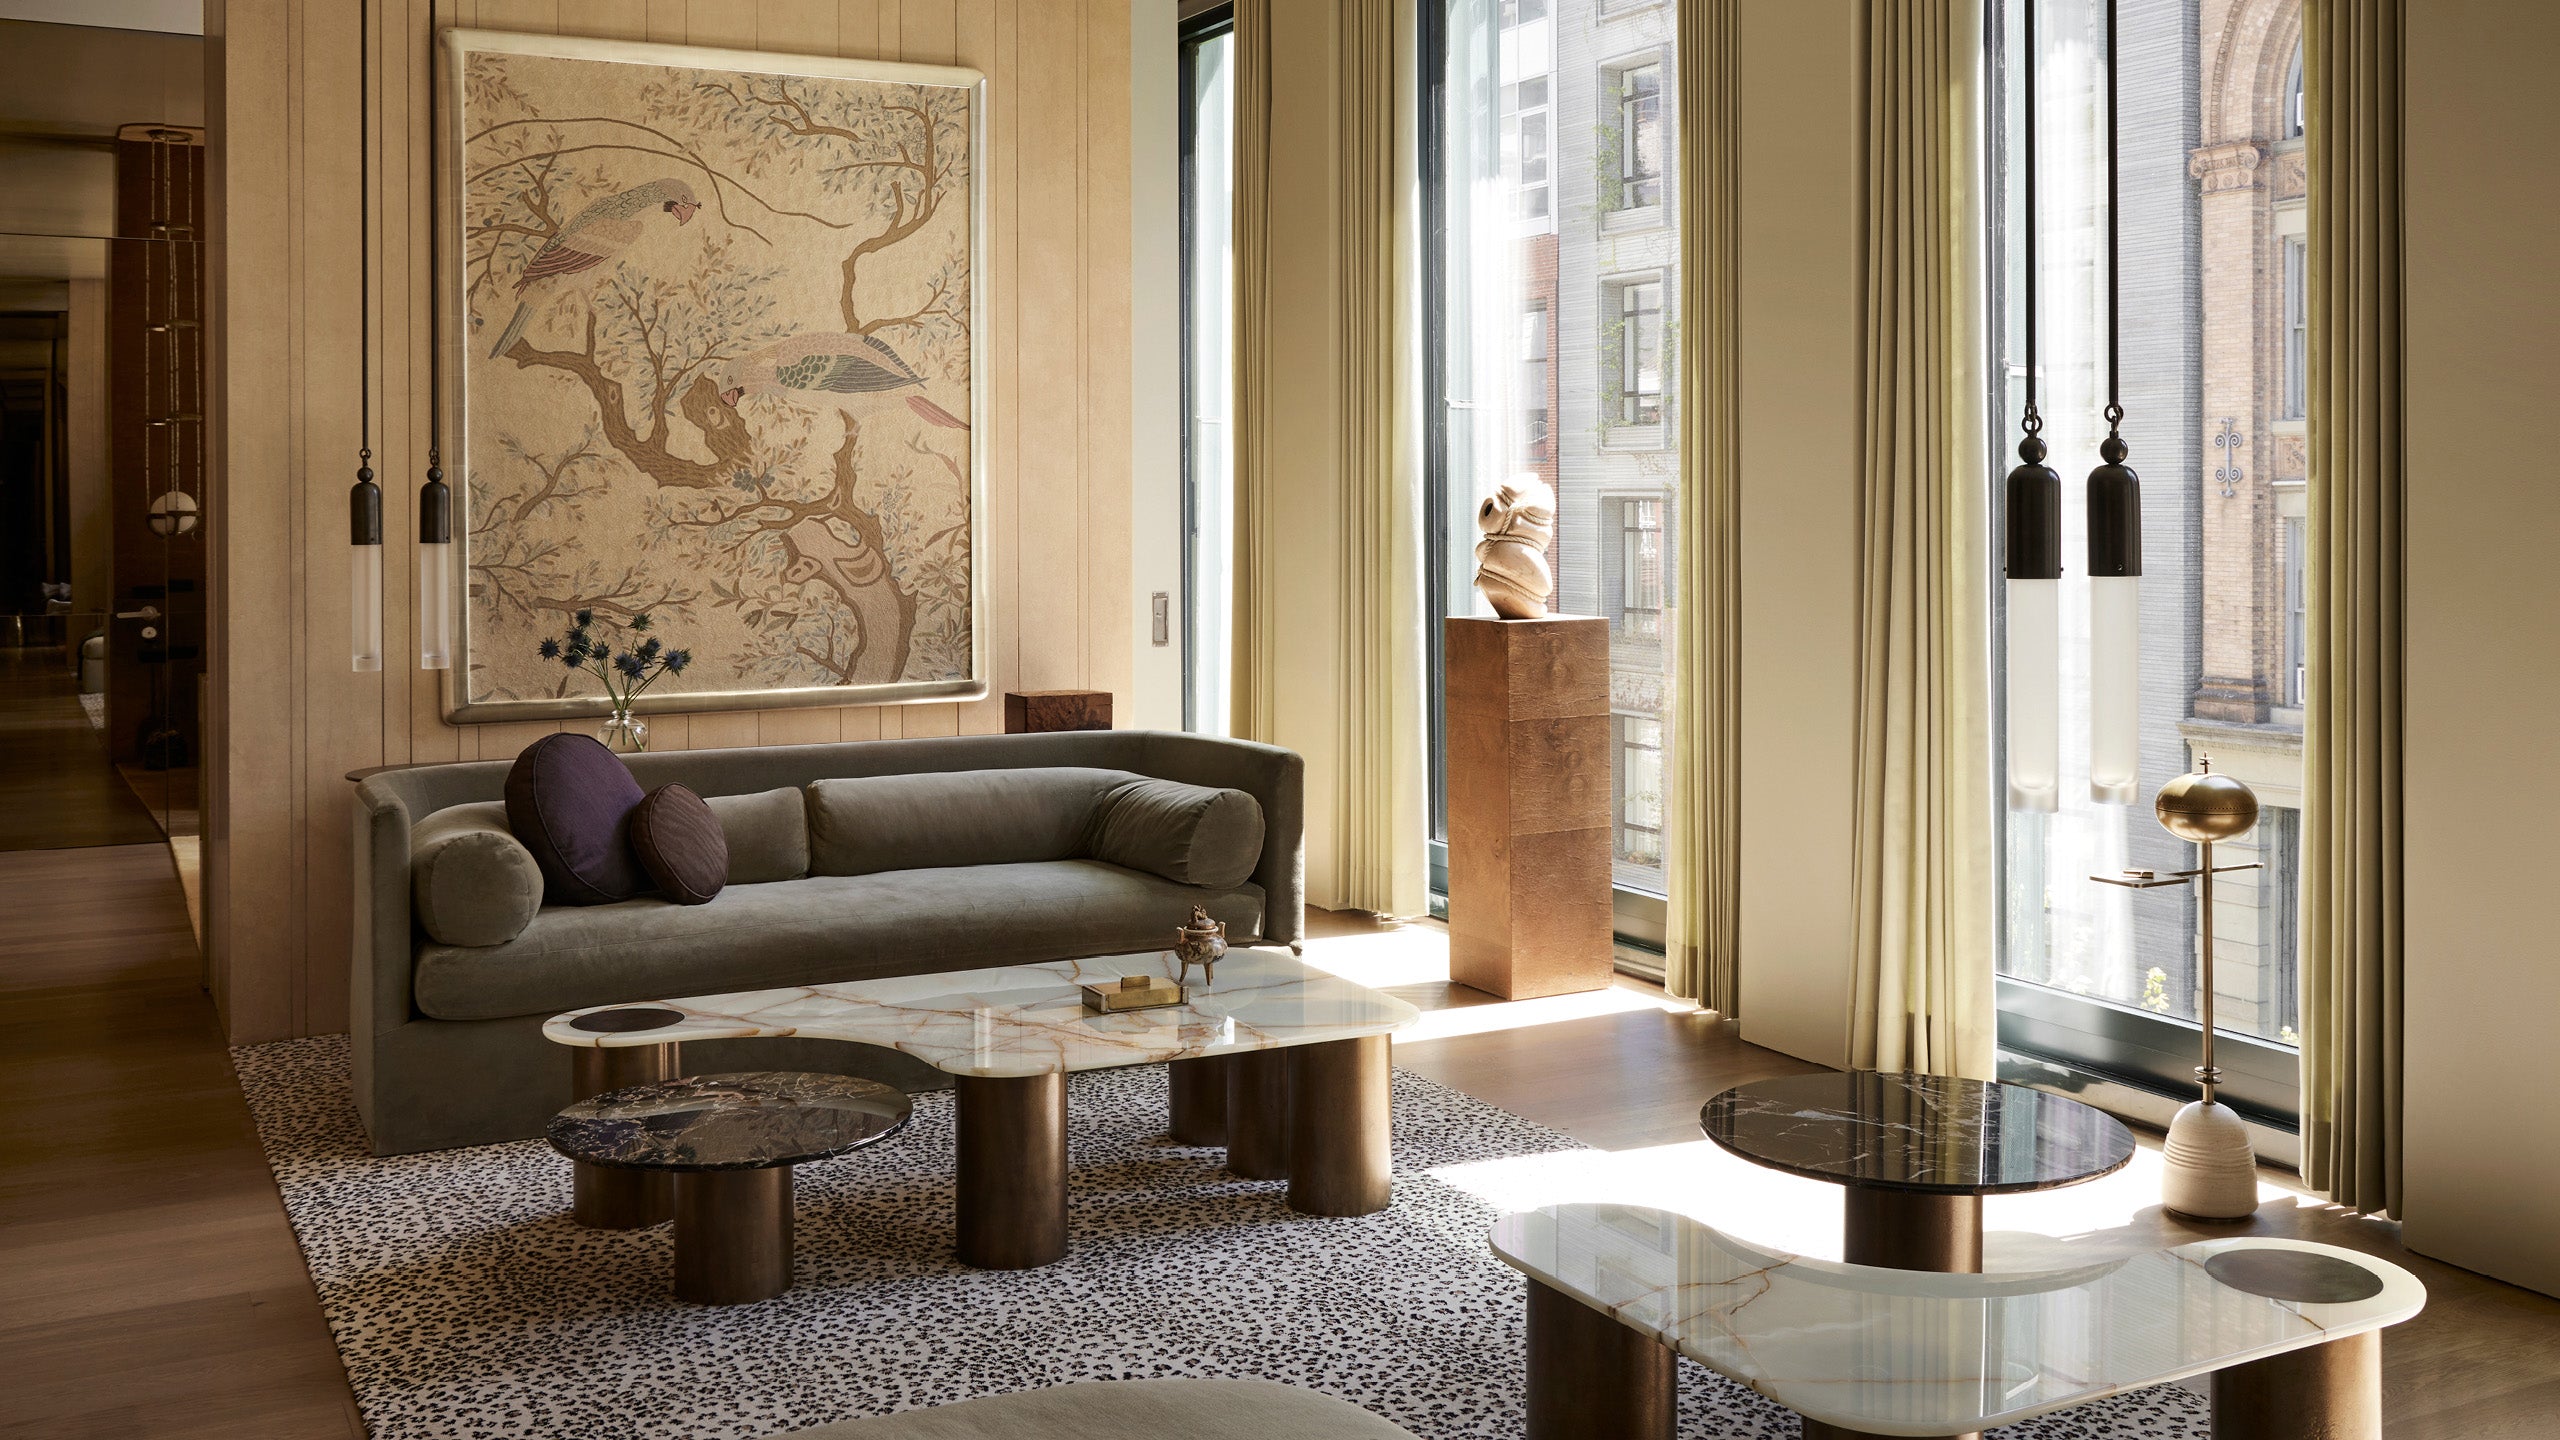 TASSEL : 1 ceiling pendants and INTERLUDE marble tables at the Bond Street residence. 